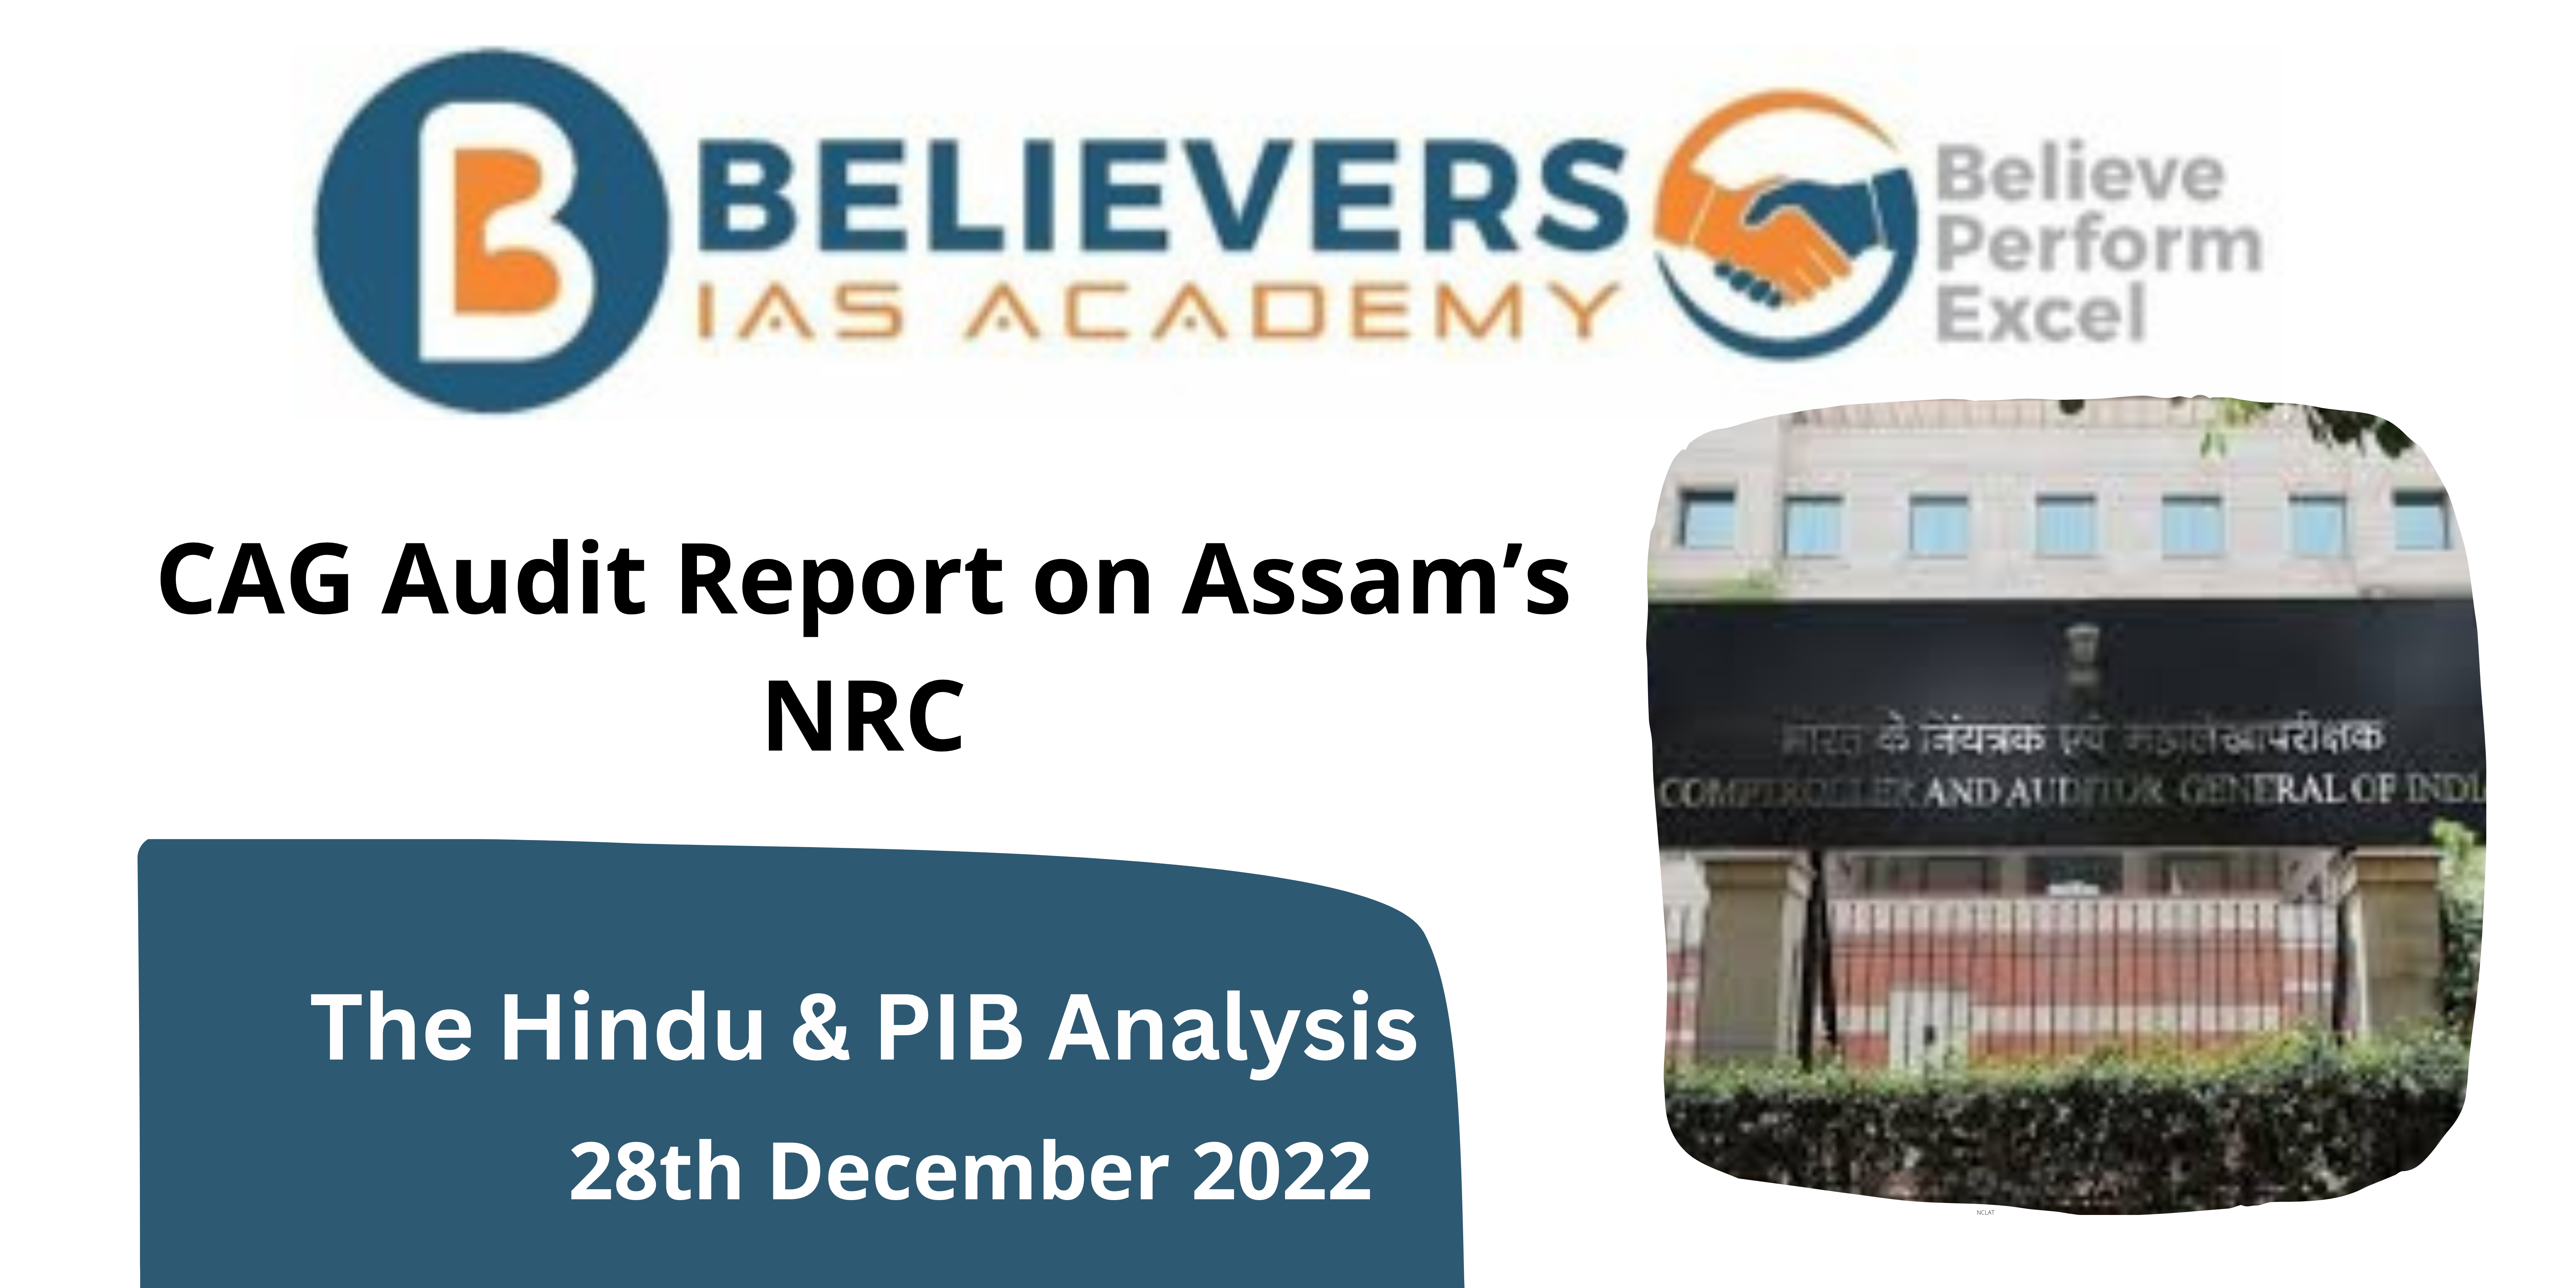 CAG Audit Report on Assam's NRC: An Overview